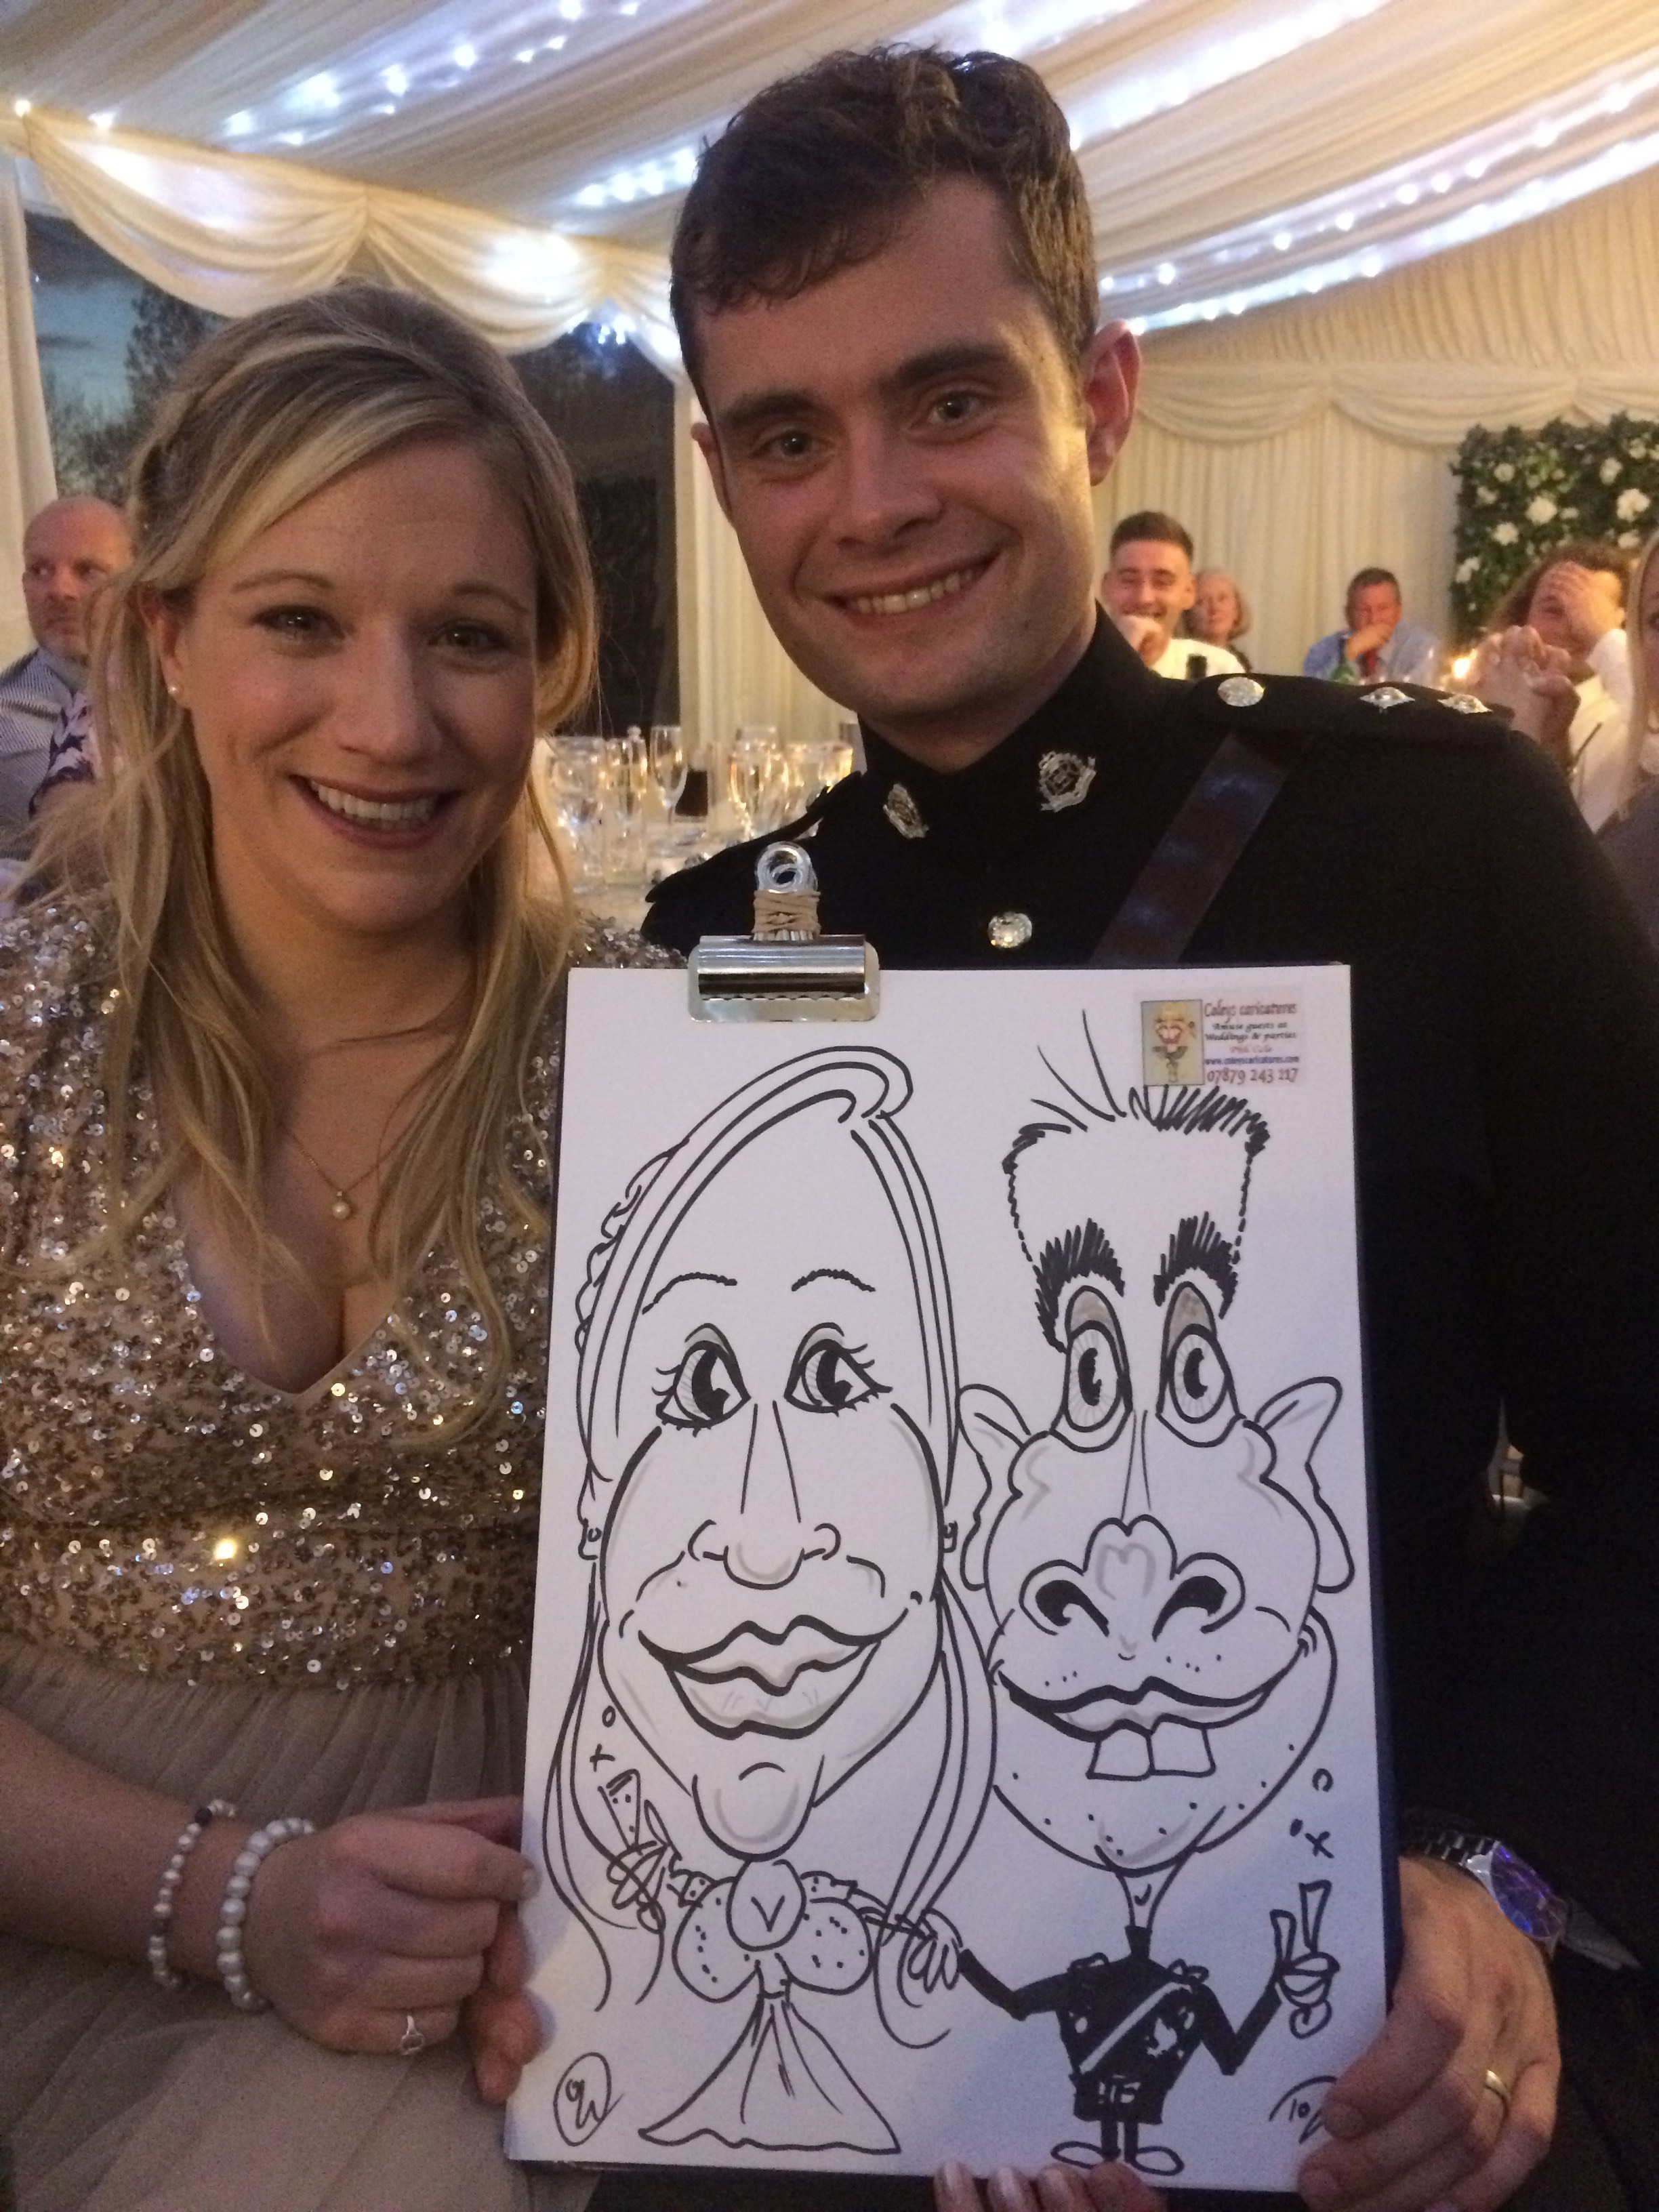 wedding caricatures are ideal for guest mementos